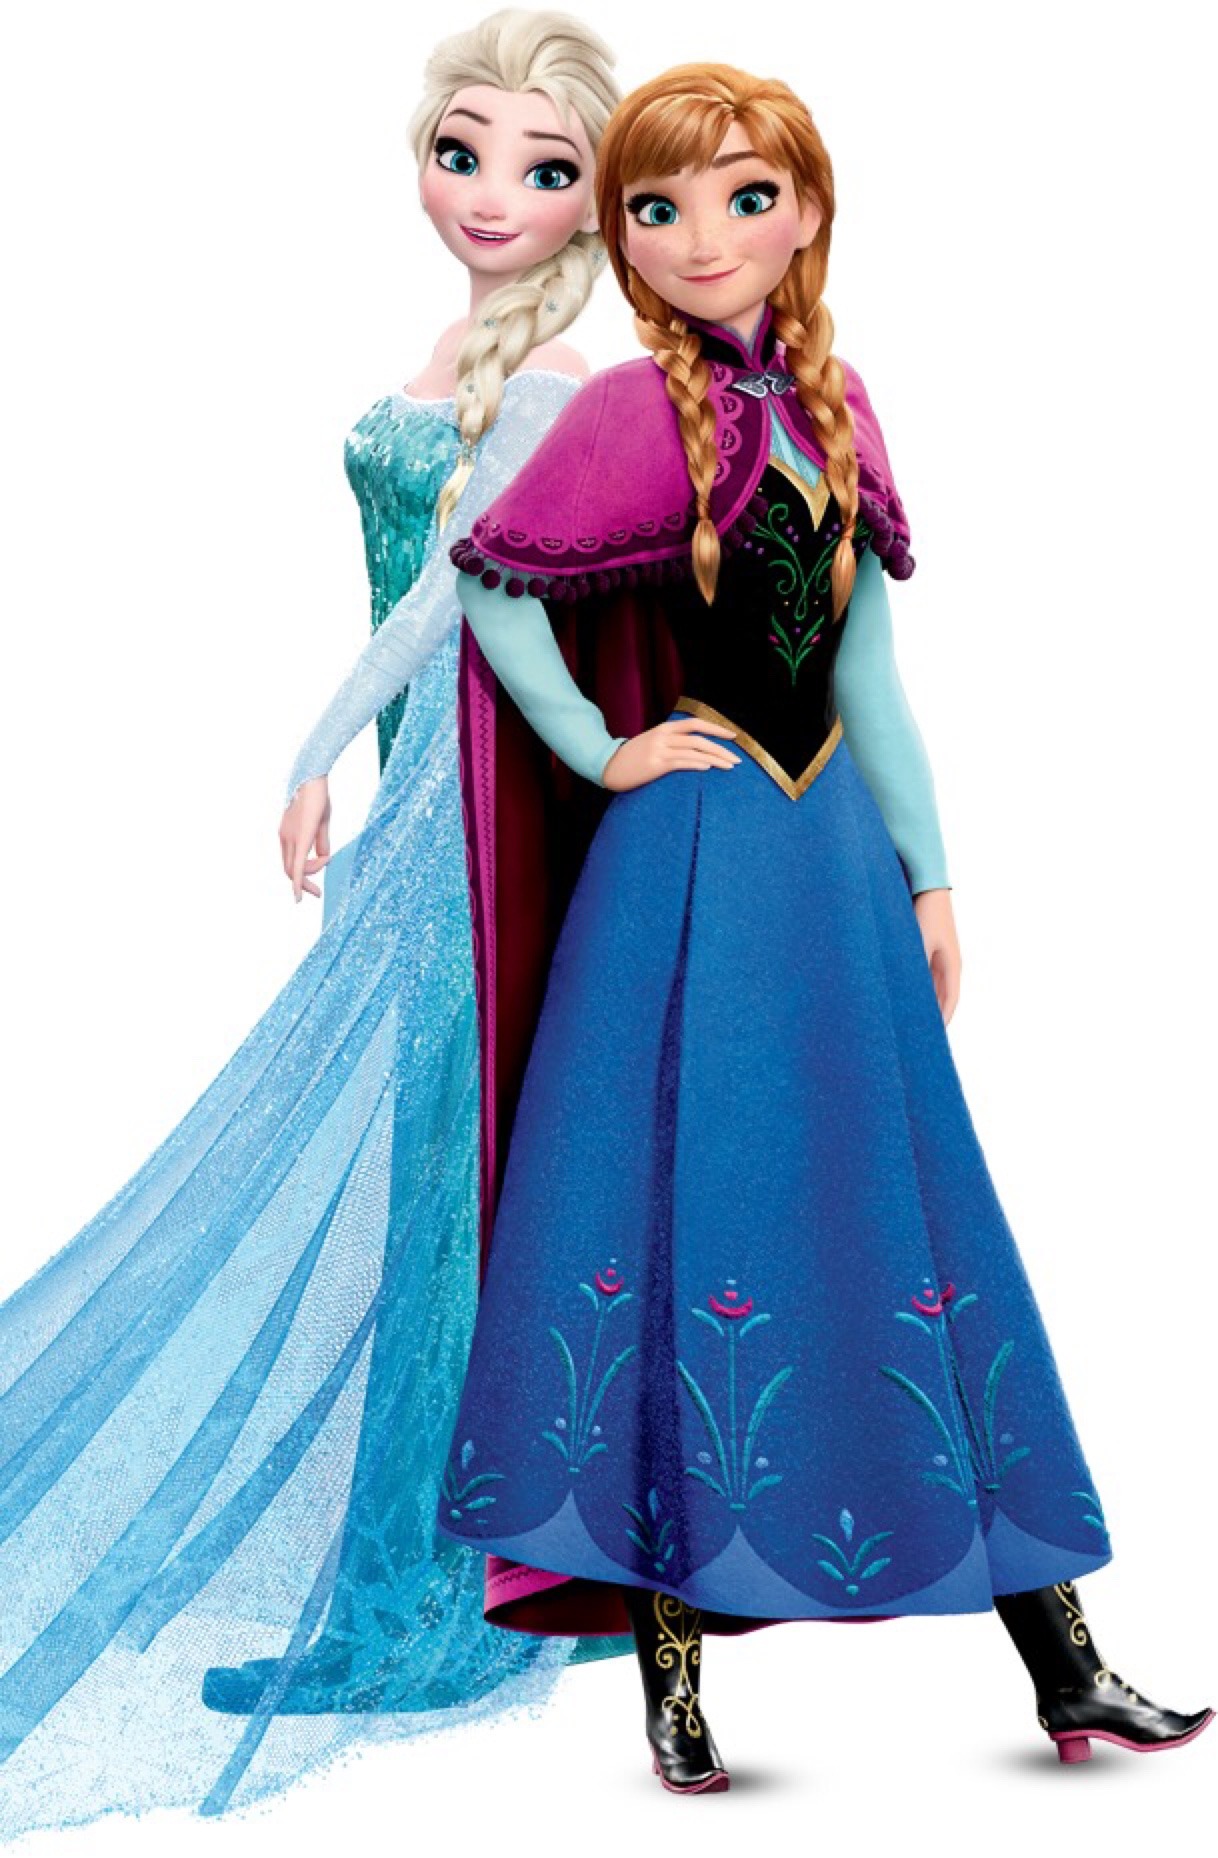 Image result for elsa and anna